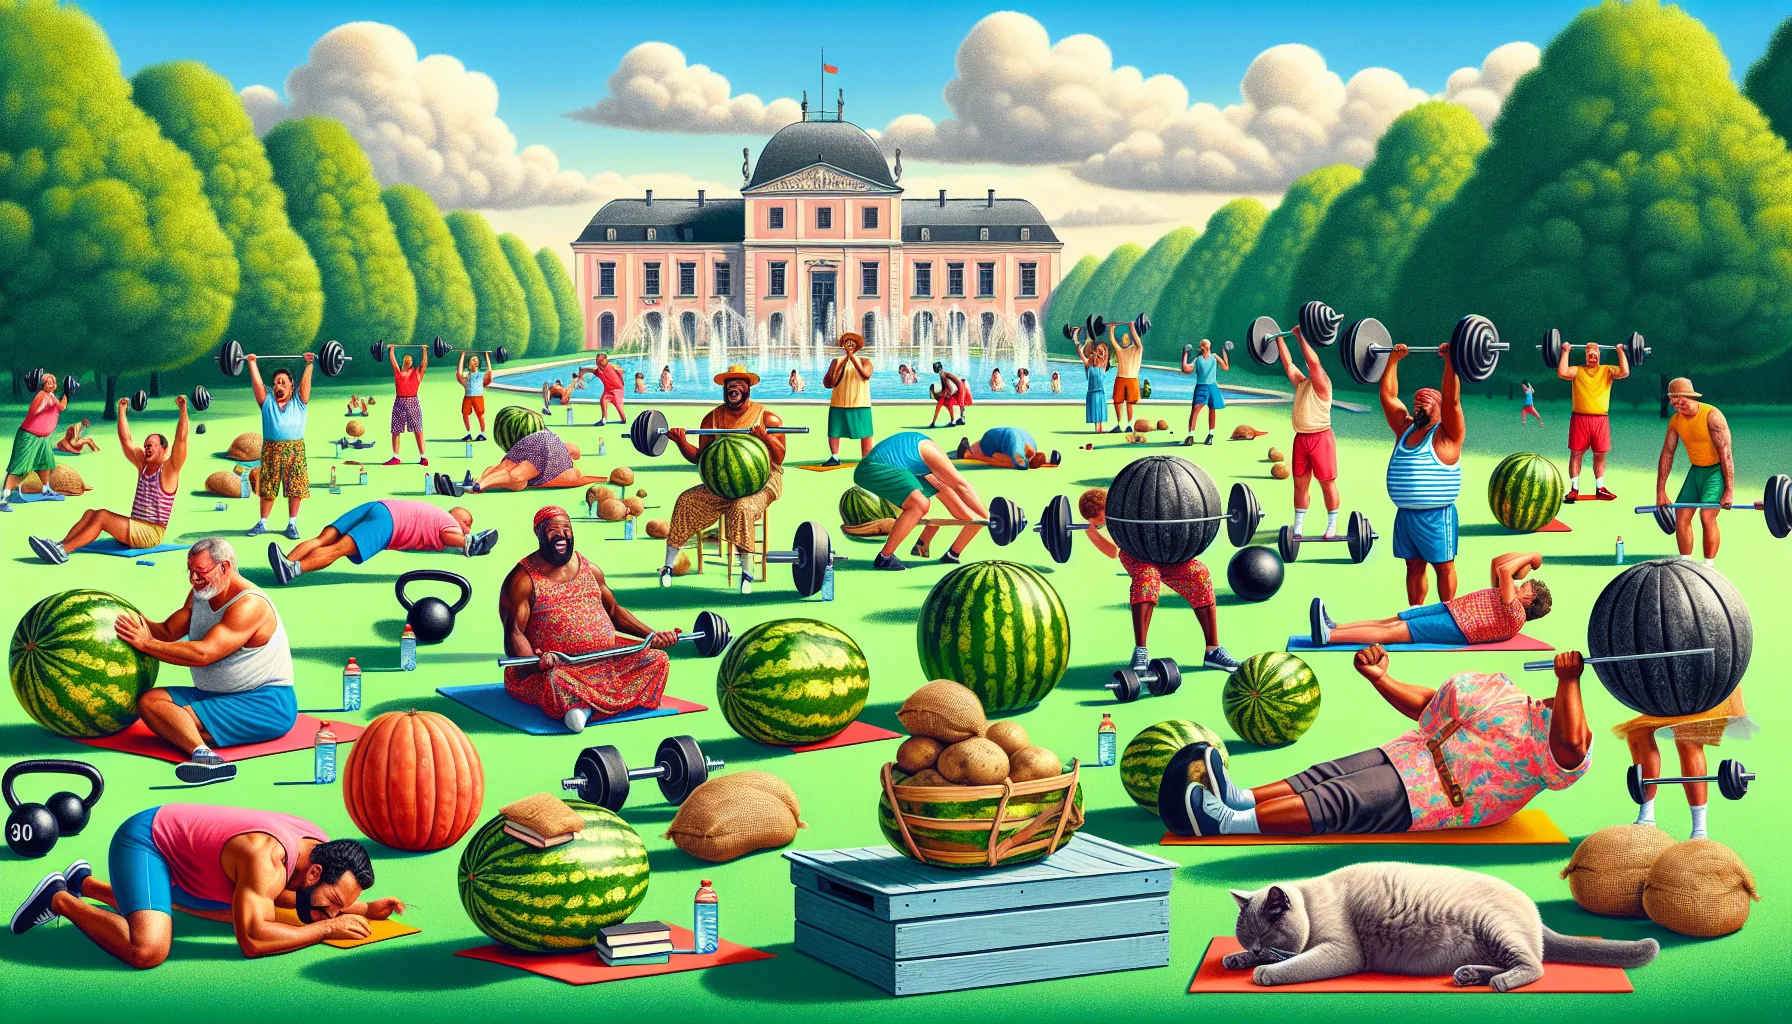 Imagine a picturesque outdoor scenario with a vibrant atmosphere. In the center, a group of hilariously uncoordinated individuals of diverse descents and genders, are attempting weighted calisthenics. The weights aren't conventional dumbbells or kettlebells, but rather everyday objects like watermelons, sacks of potatoes, large books, and a snoring cat. Some individuals are struggling with their watermelon bicep curls, while others are chuckling as they lift sacks of potatoes overhead. The scene fosters an amusing, light-hearted vibe, encouraging and entertaining viewers about the idea of exercise.